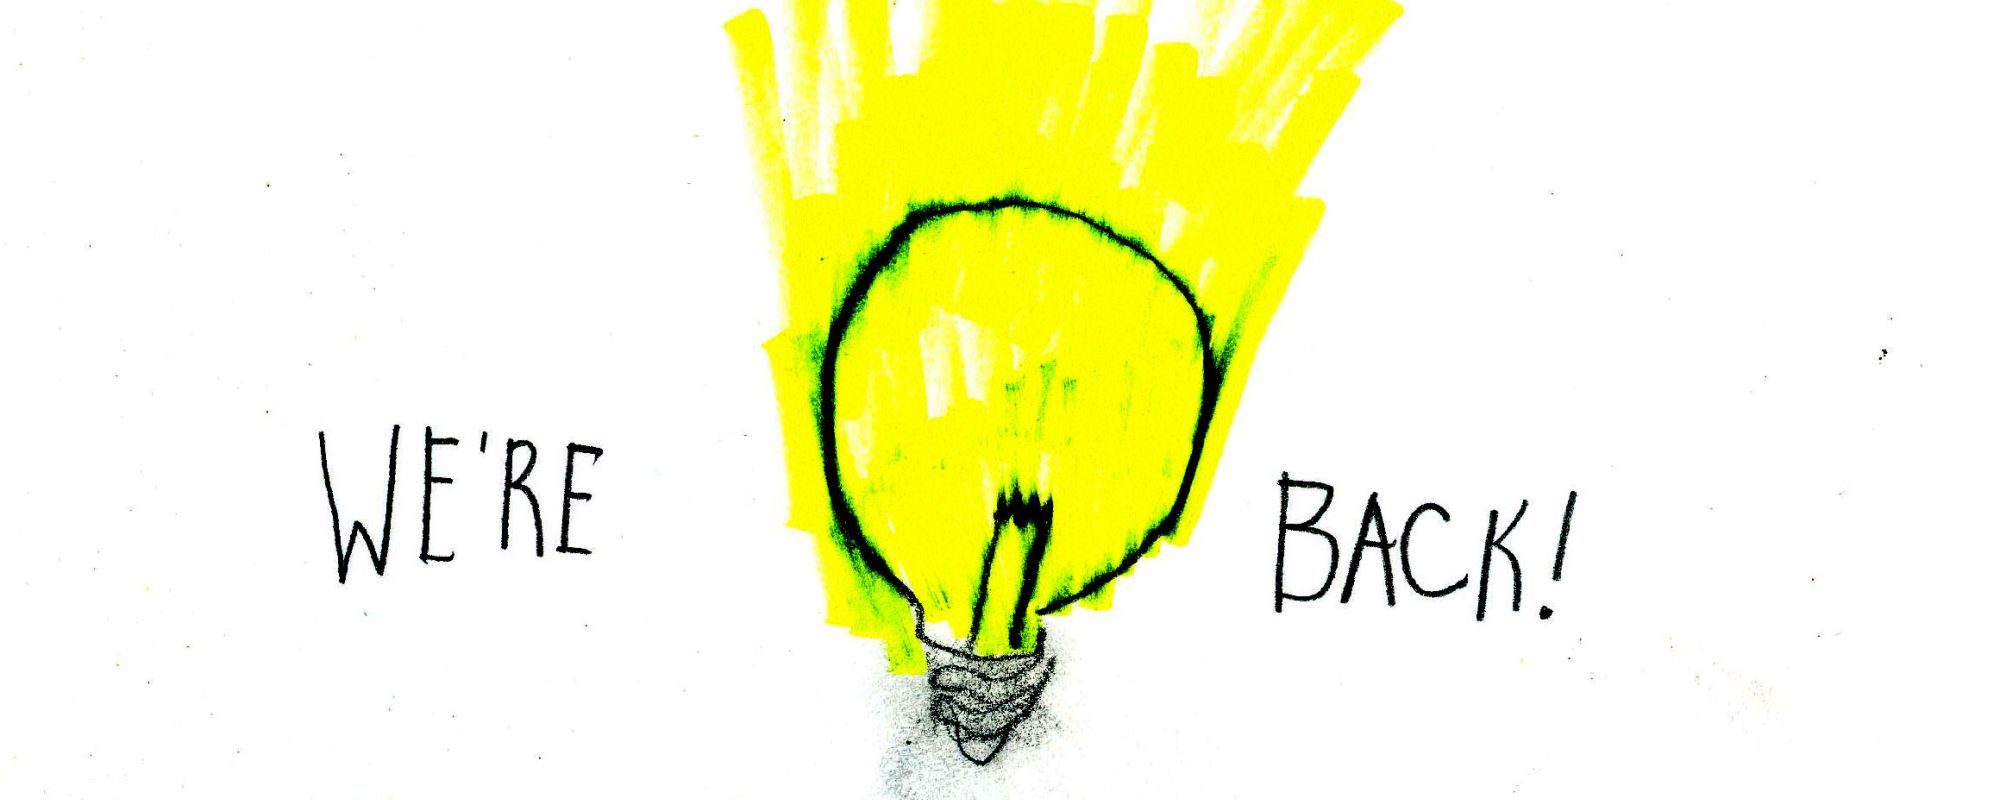 A hand-drawn photo of a lightbulb that is overflowing with yellow light, with "We're Back!" written on either side.